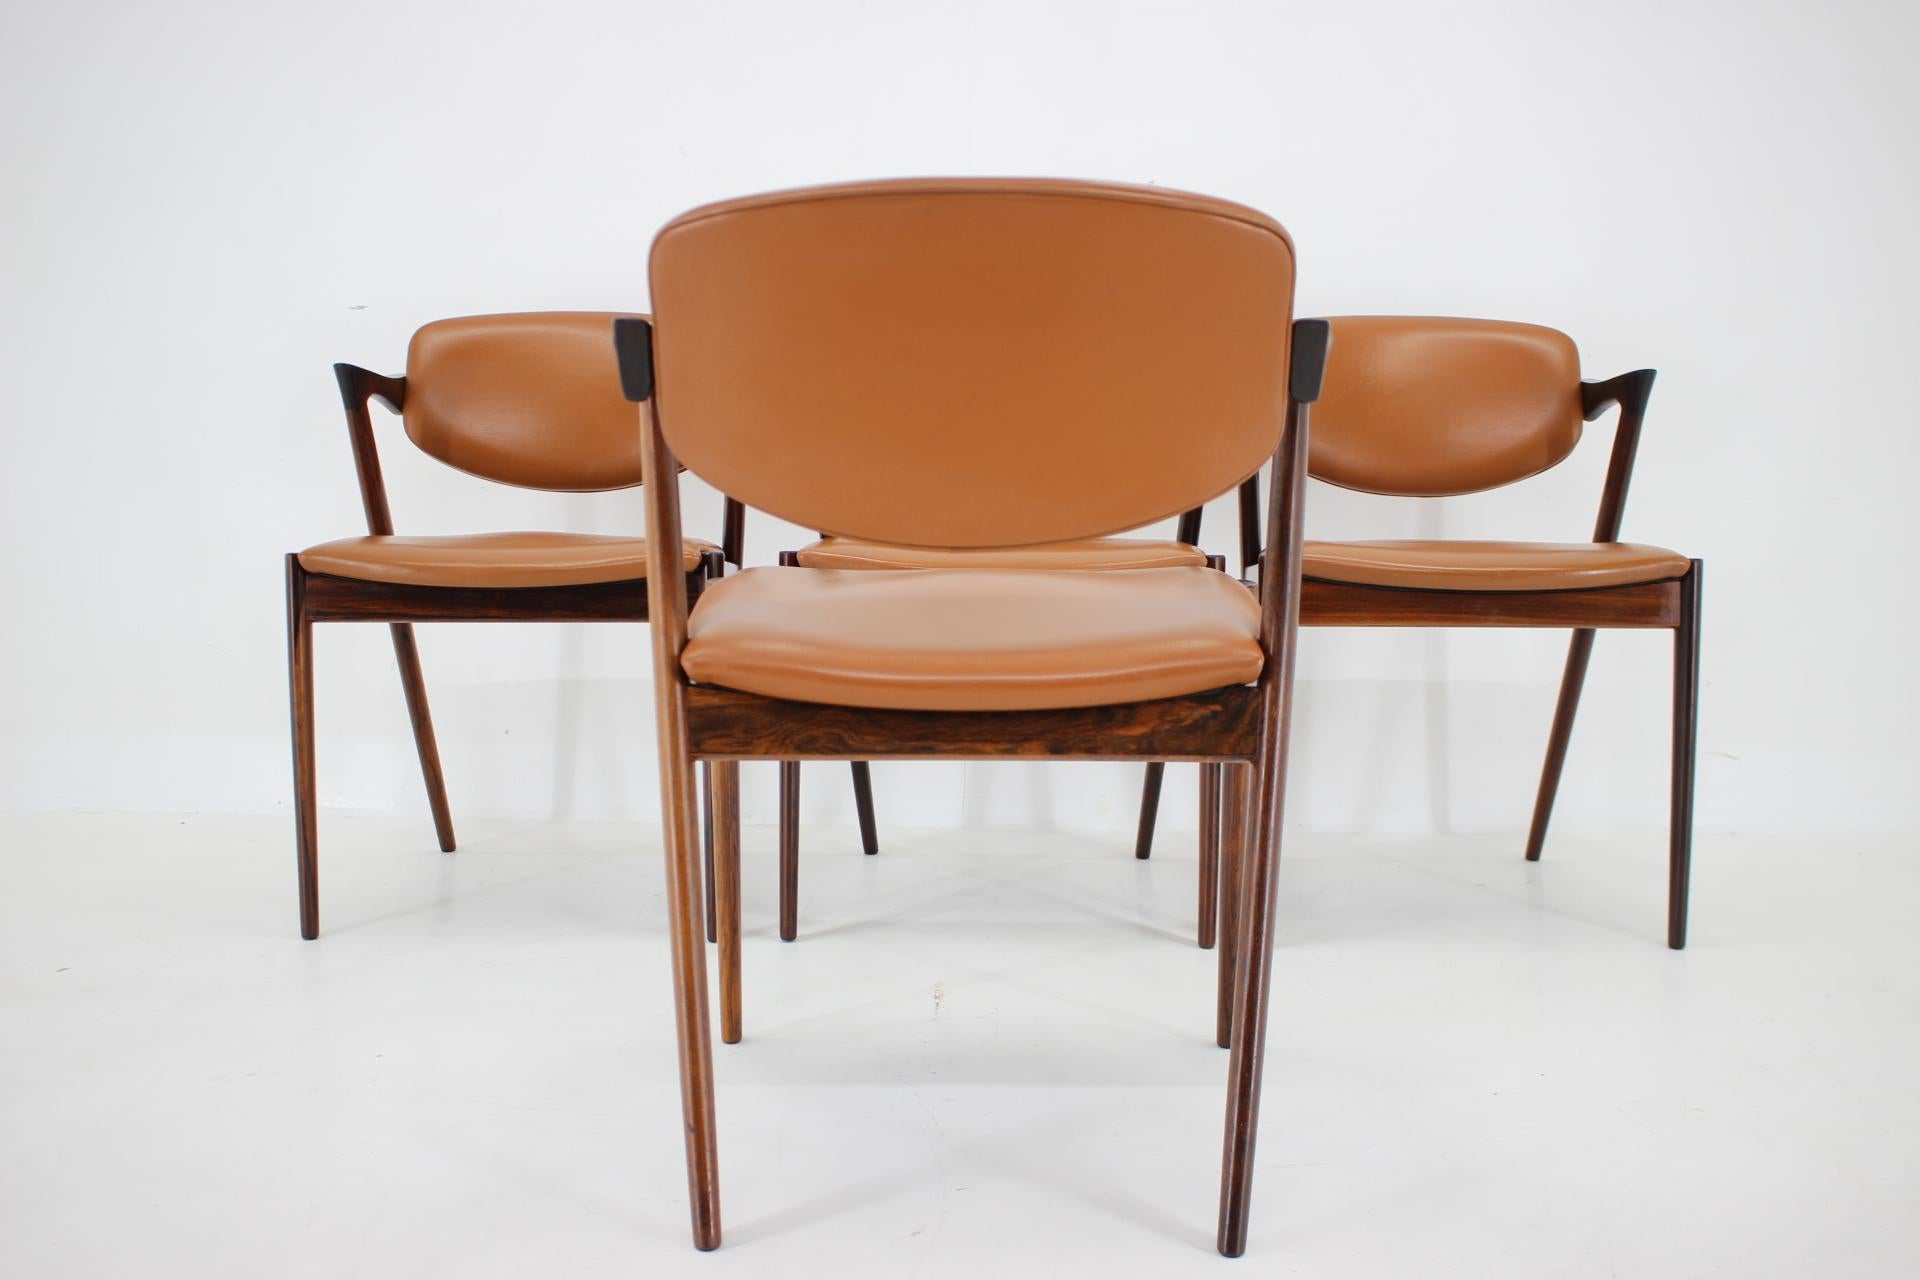 1960s Kai Kristiansen Model 42 Dining Chairs in Palisander, set of 4 For Sale 1